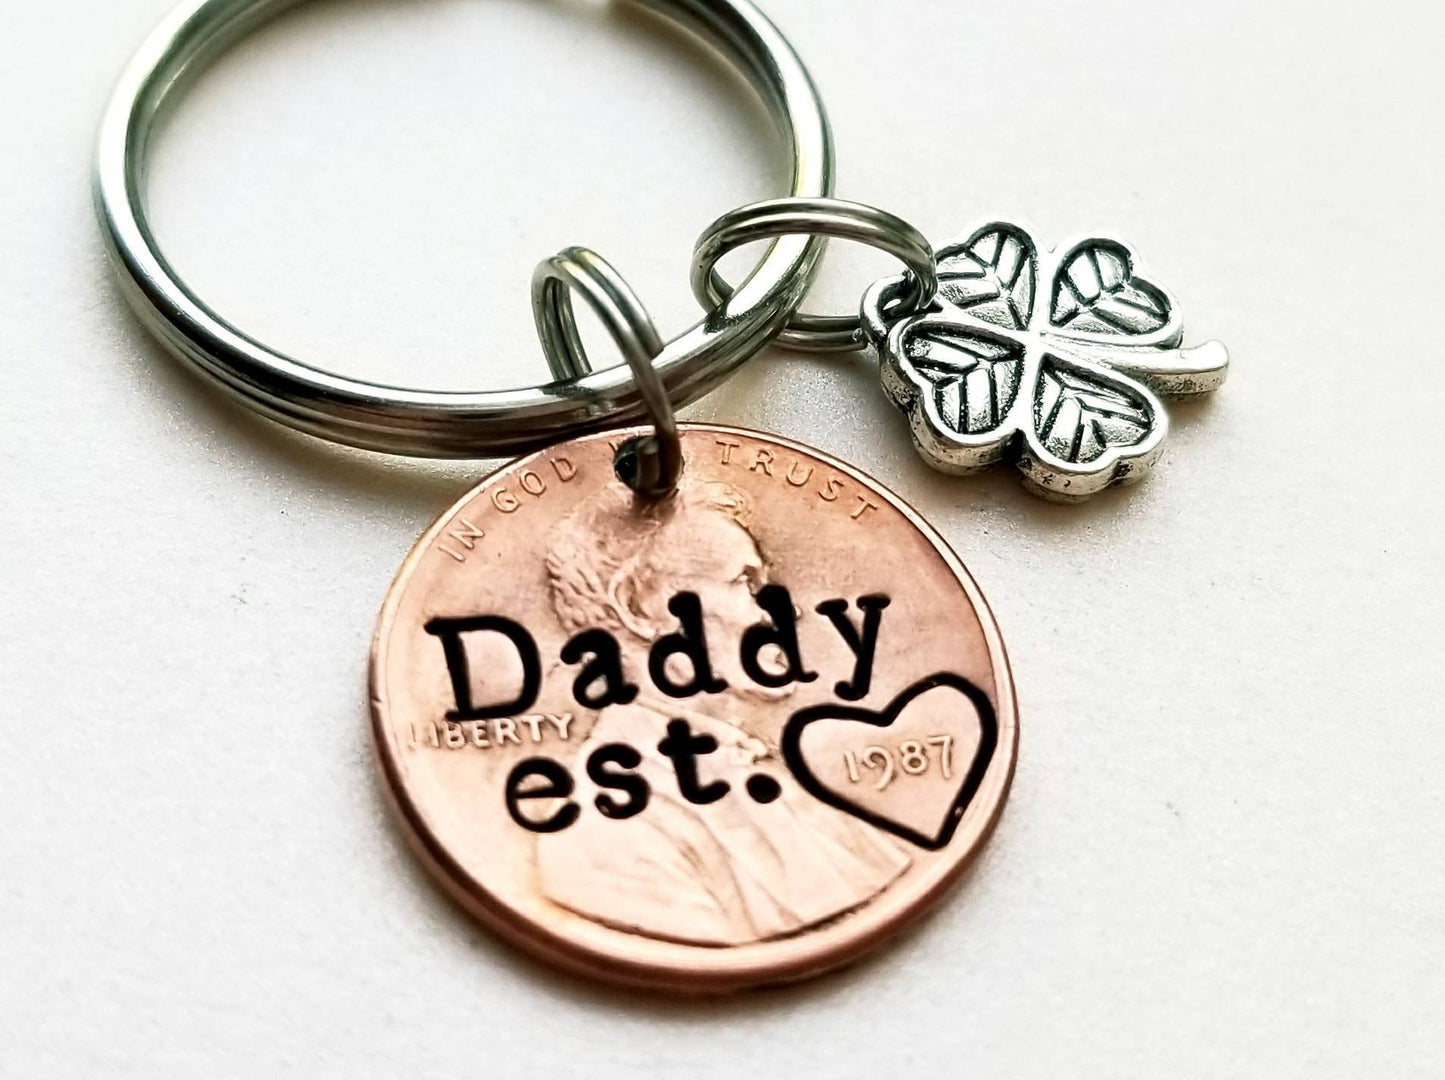 Personalized Daddy Penny Keychain, Christmas Gift For Dad, Father's Day Gift, From Child, Son, Daughter, Stocking Stuffer, From Wife, Papa